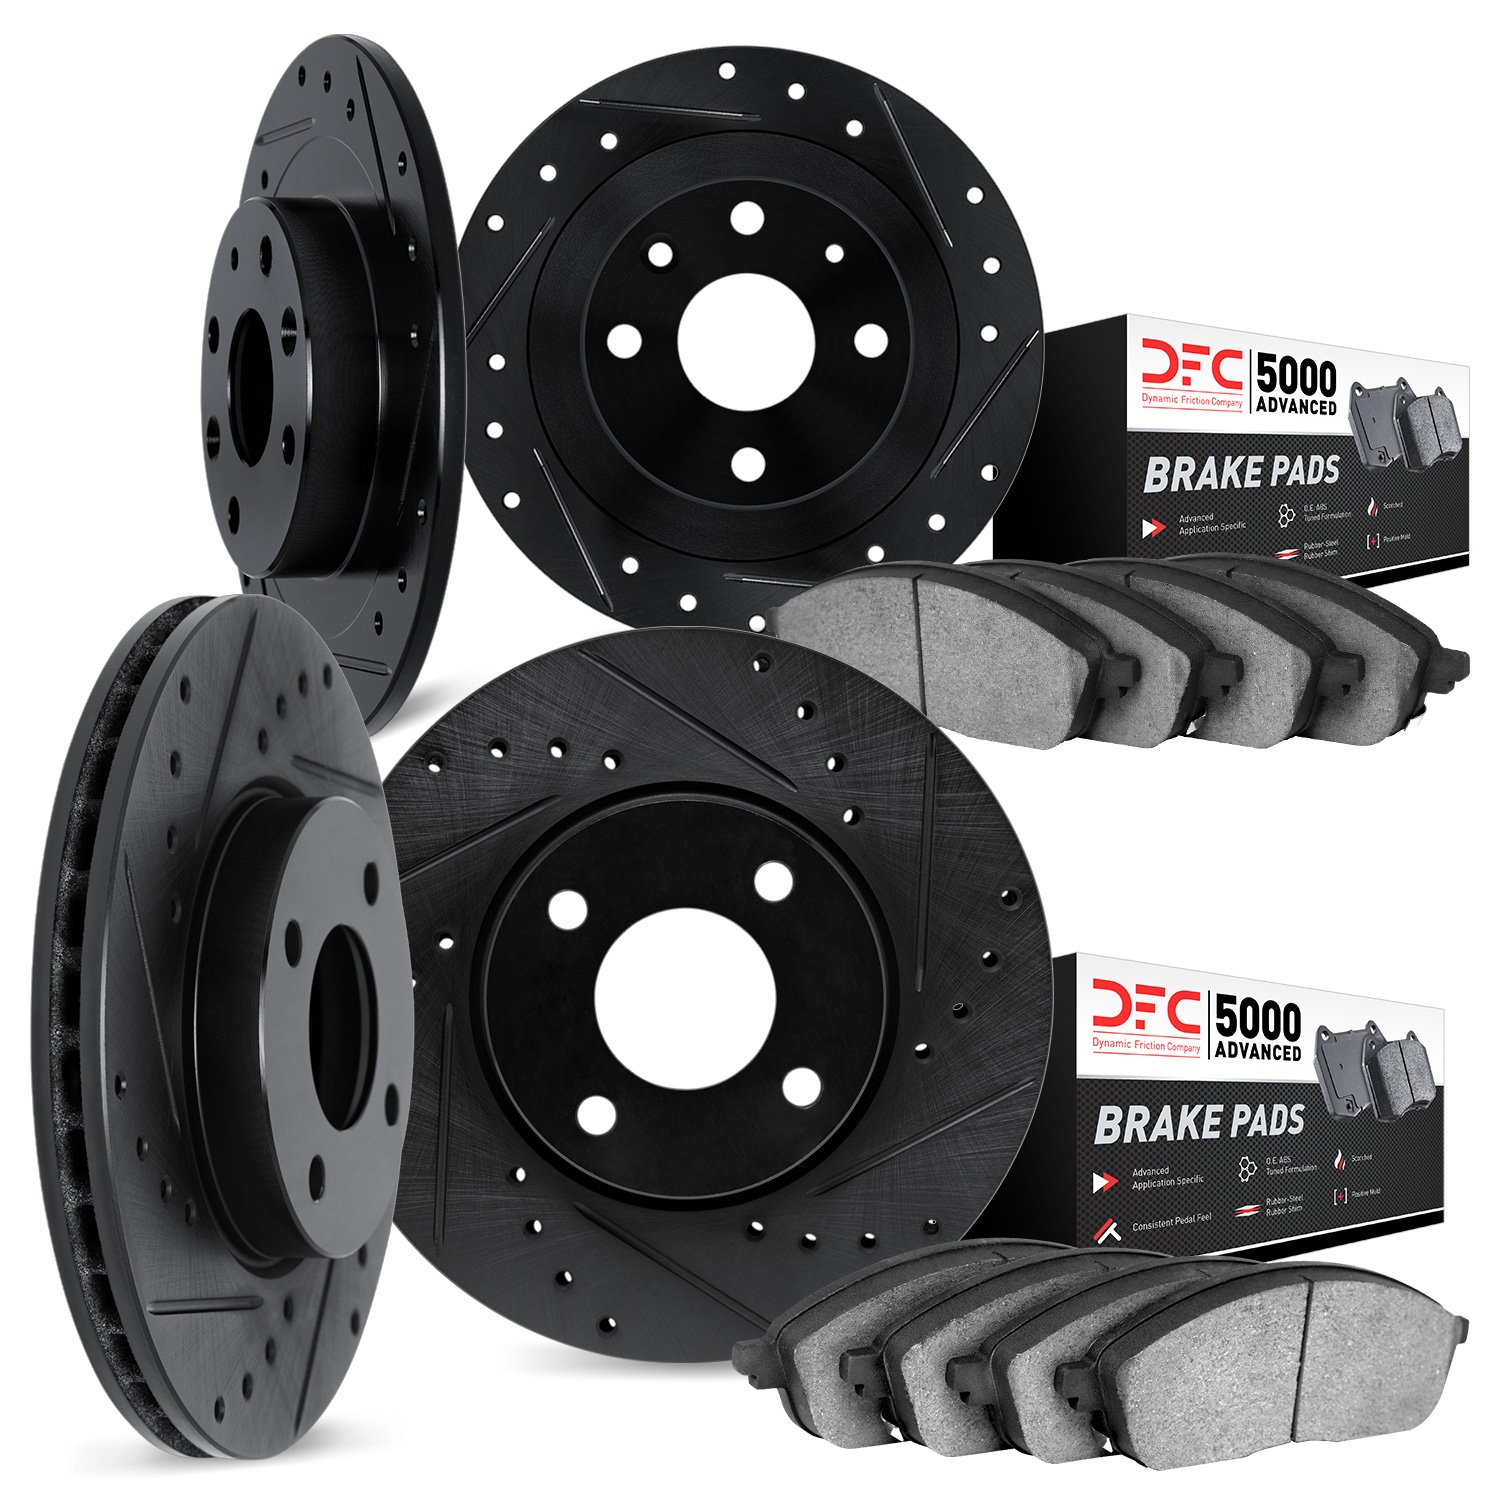 8504-74057 Drilled/Slotted Brake Rotors w/5000 Advanced Brake Pads Kit [Black], 1985-1992 Audi/Volkswagen, Position: Front and R